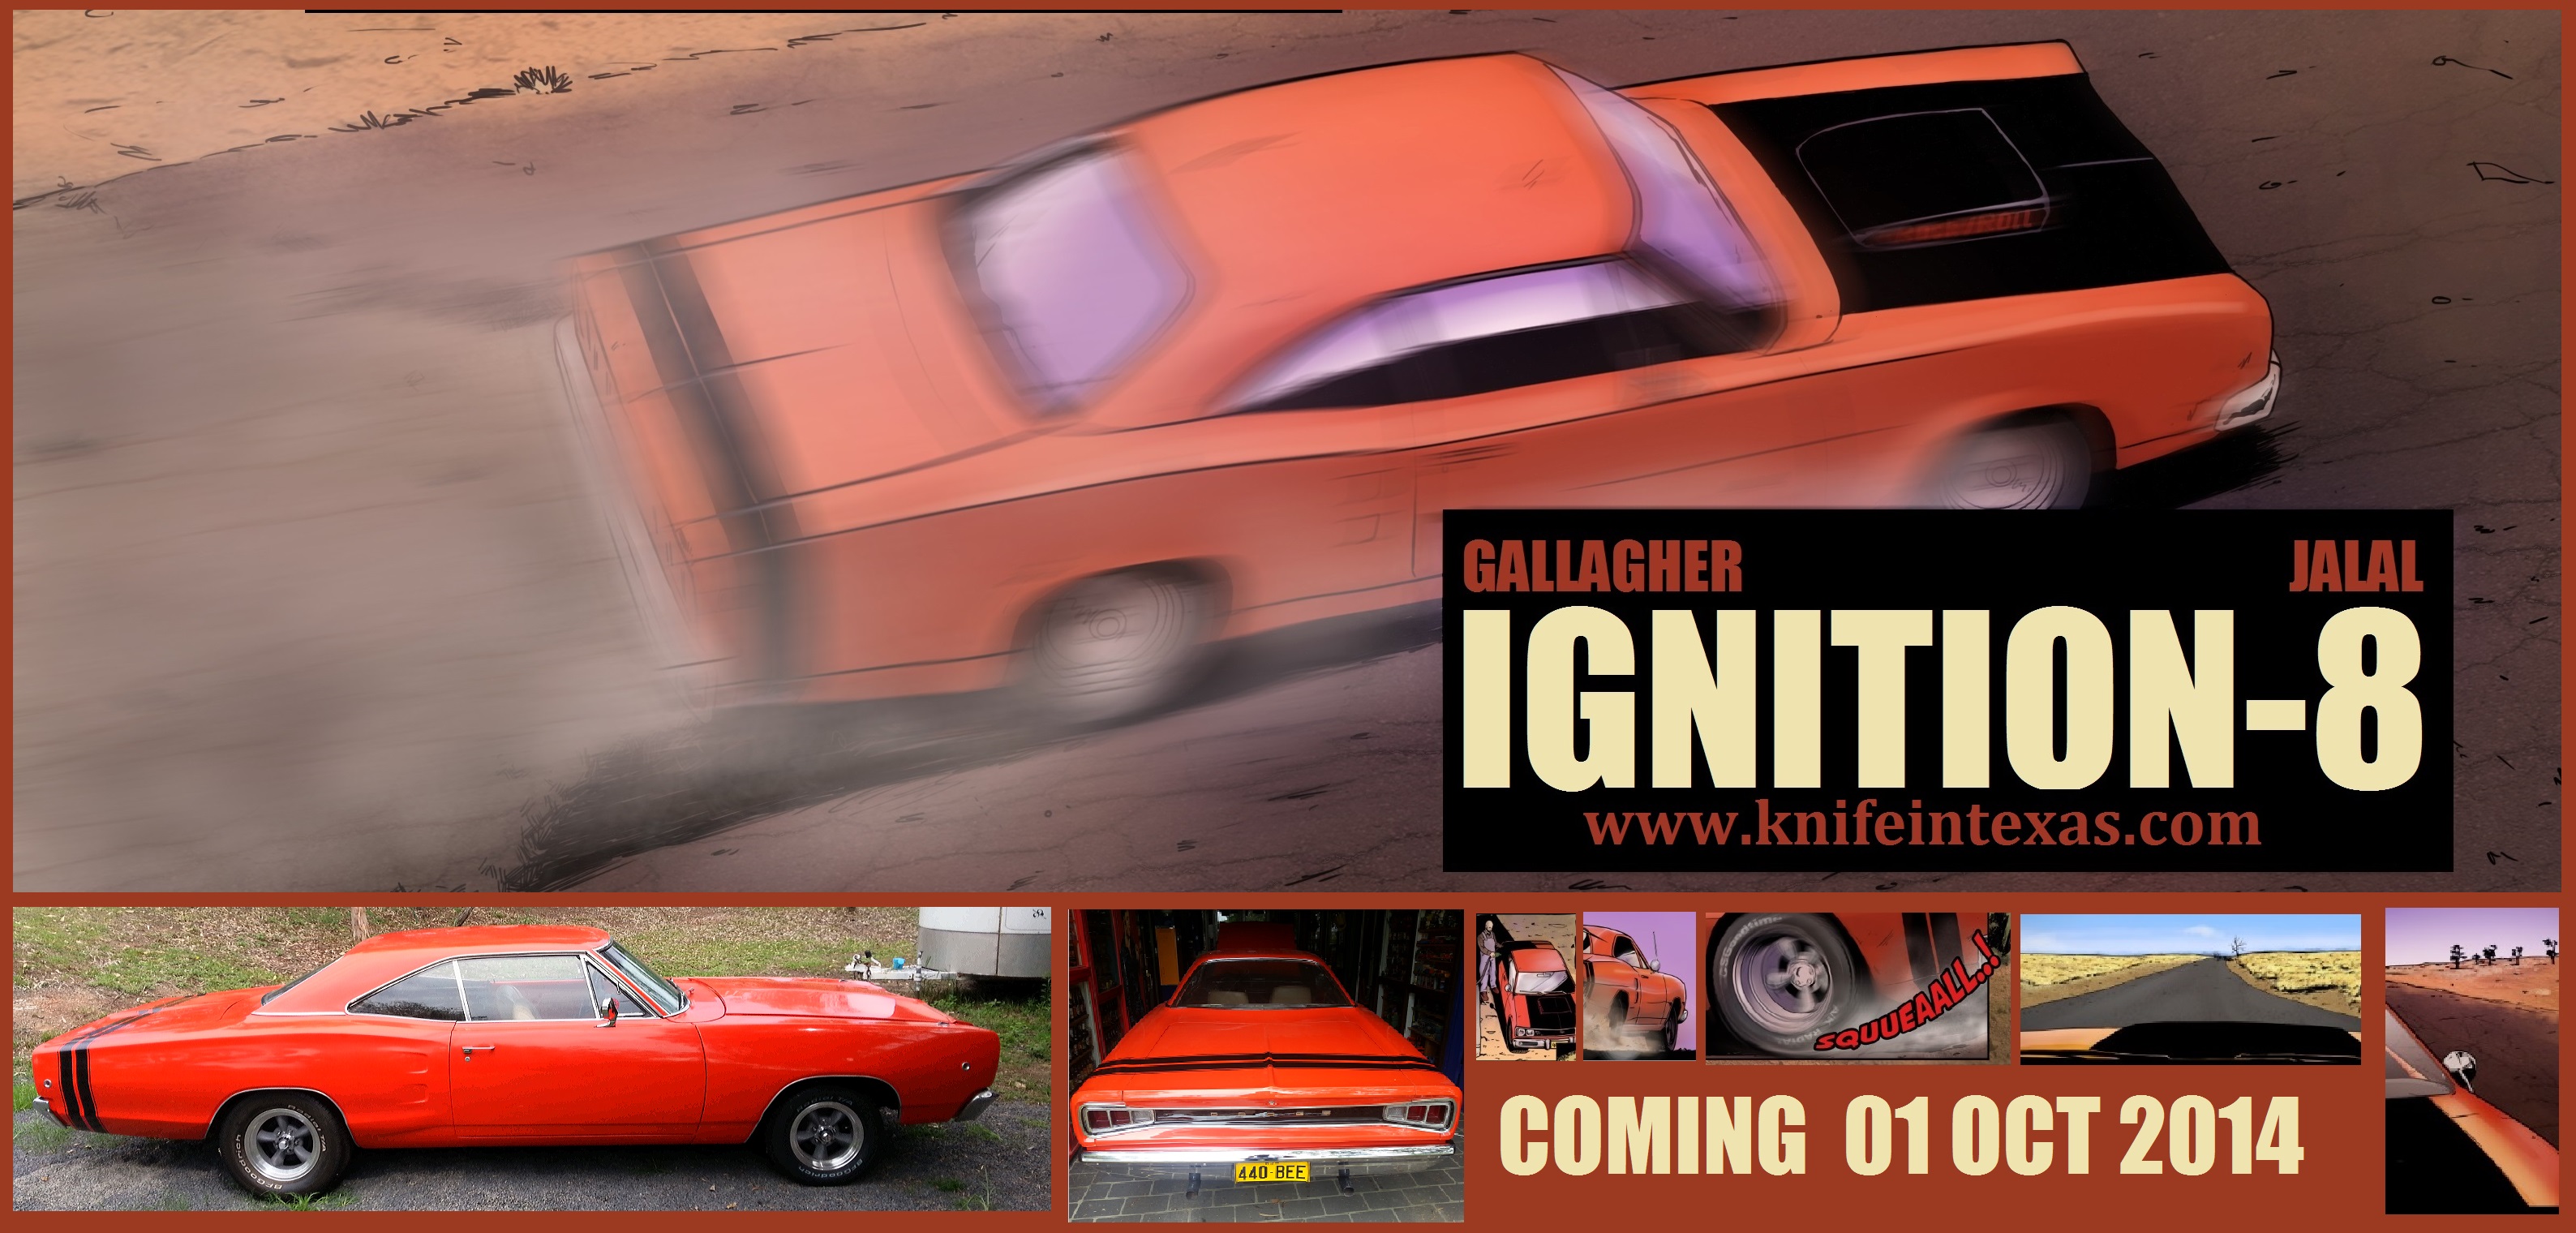 The comic, the car - all coming together. The launch is going to be huge.